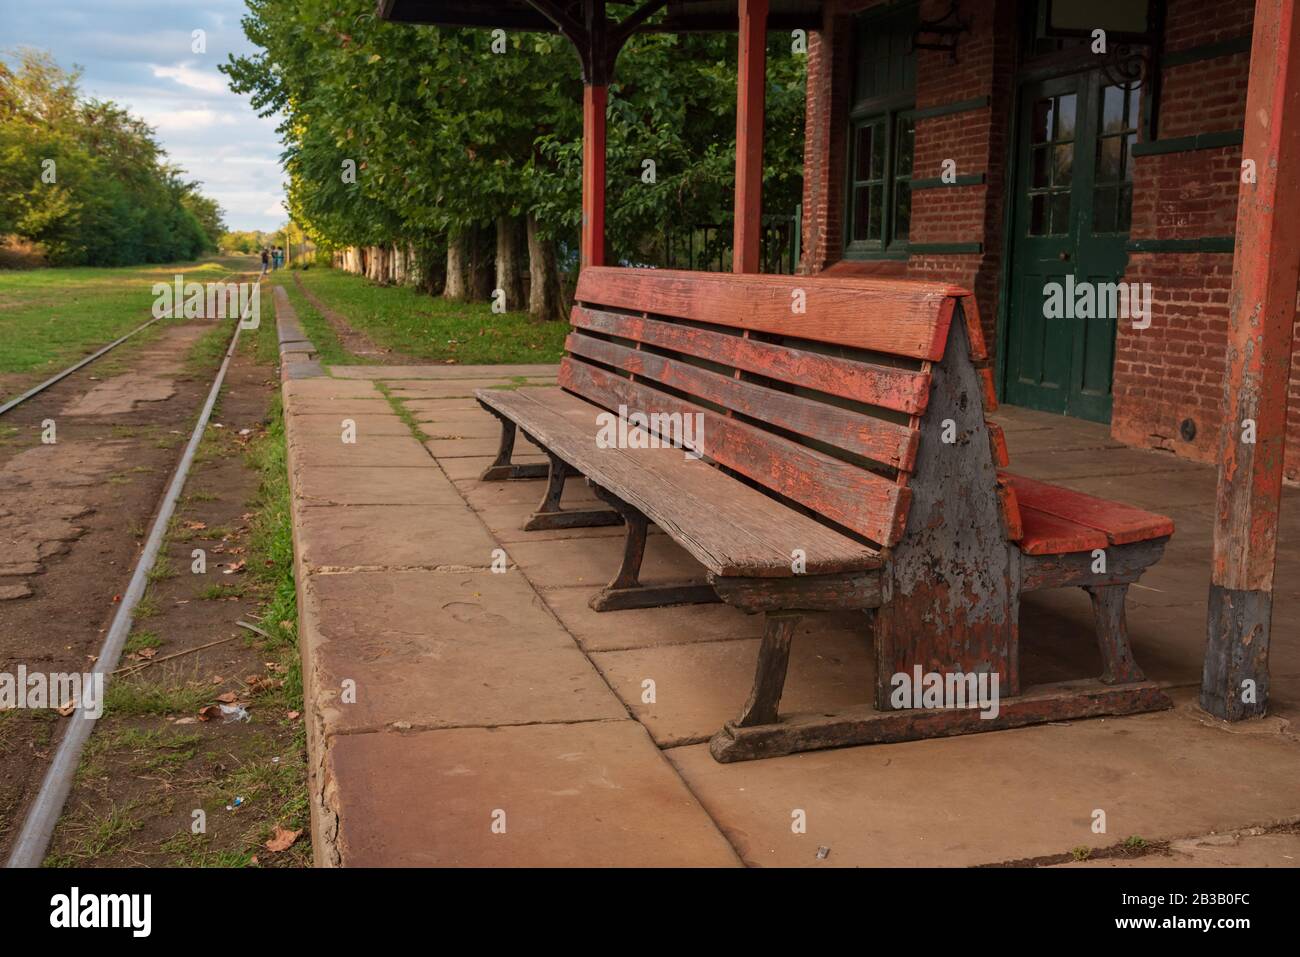 A wooden bench in an old abandoned train station with a view of the railroad with grass aroun it Stock Photo